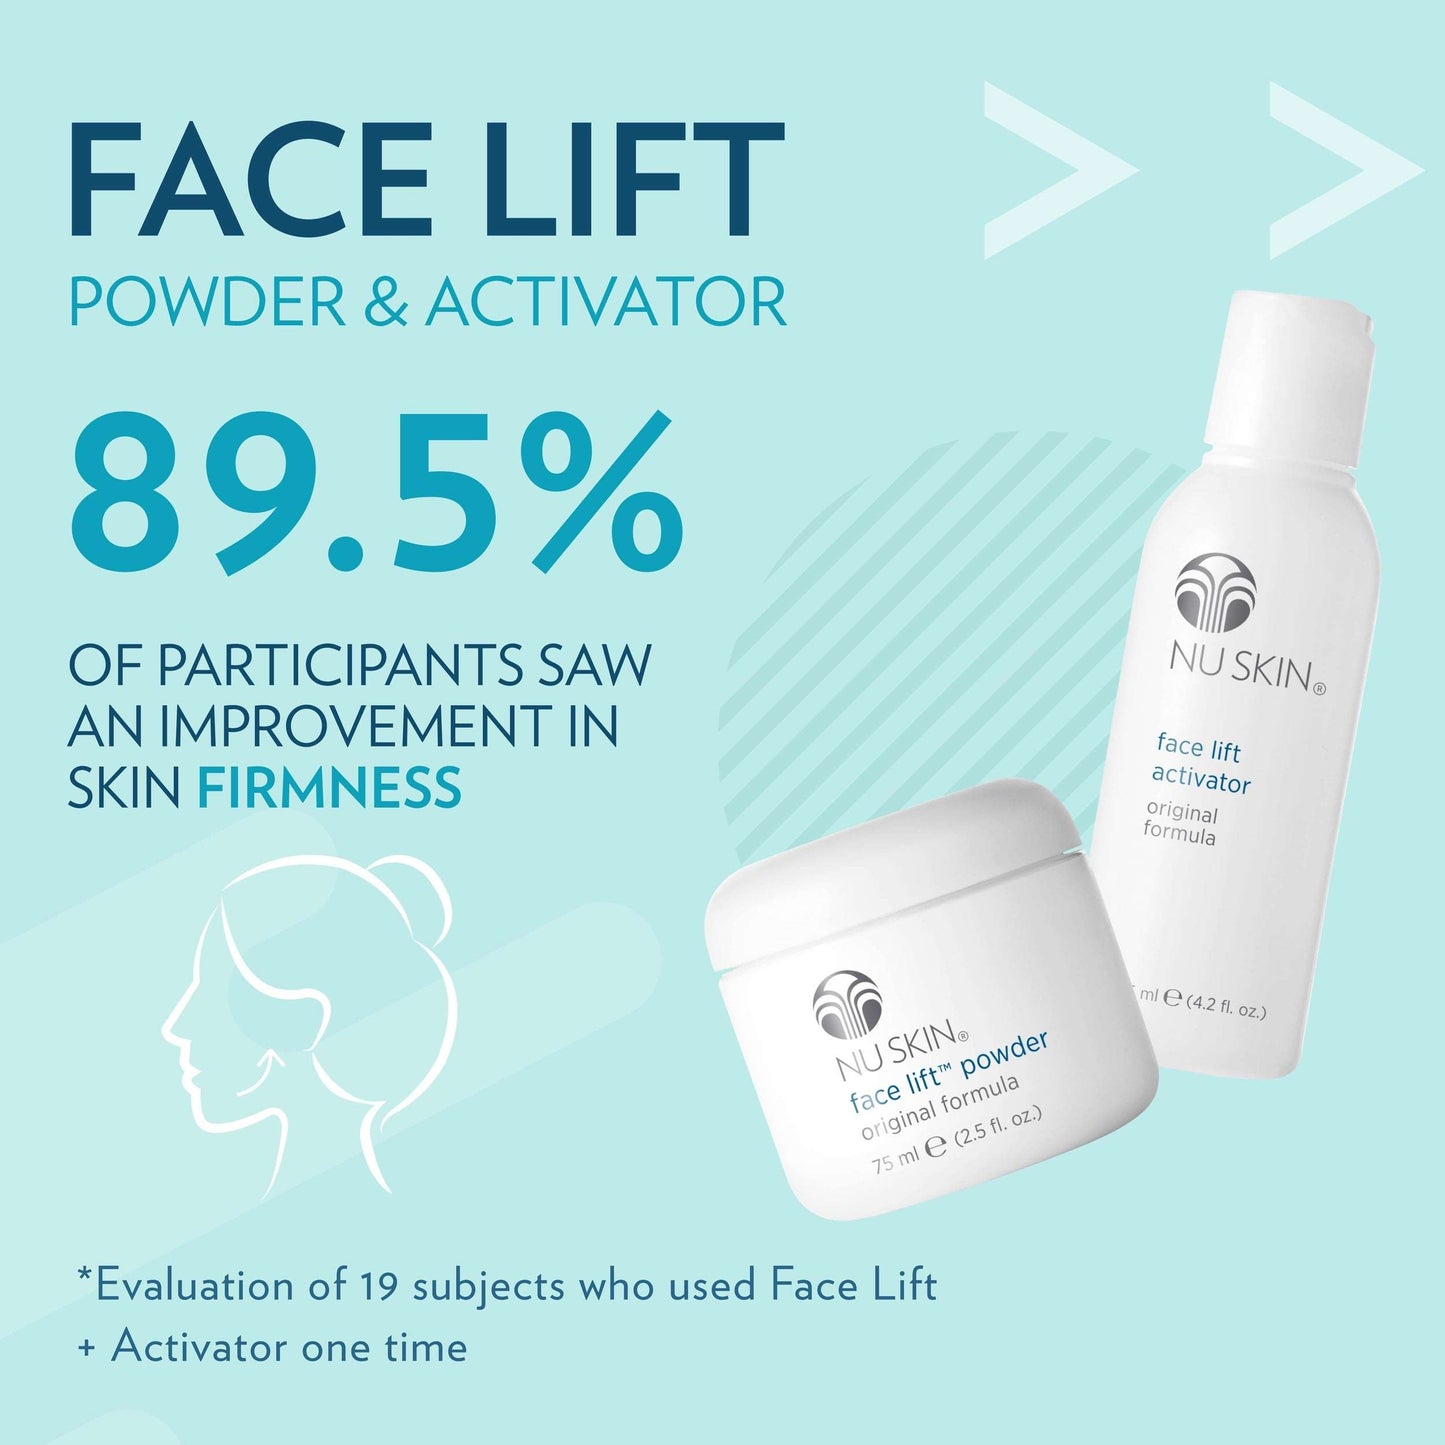 Activator (Original Formula)Buy Face Lift with Activator (Original Formula)
Face Lift works immediately to temporarily lift and tighten the face and neck for a firmer, more youthful appearance.Face Lift with Activator (Original Formula)